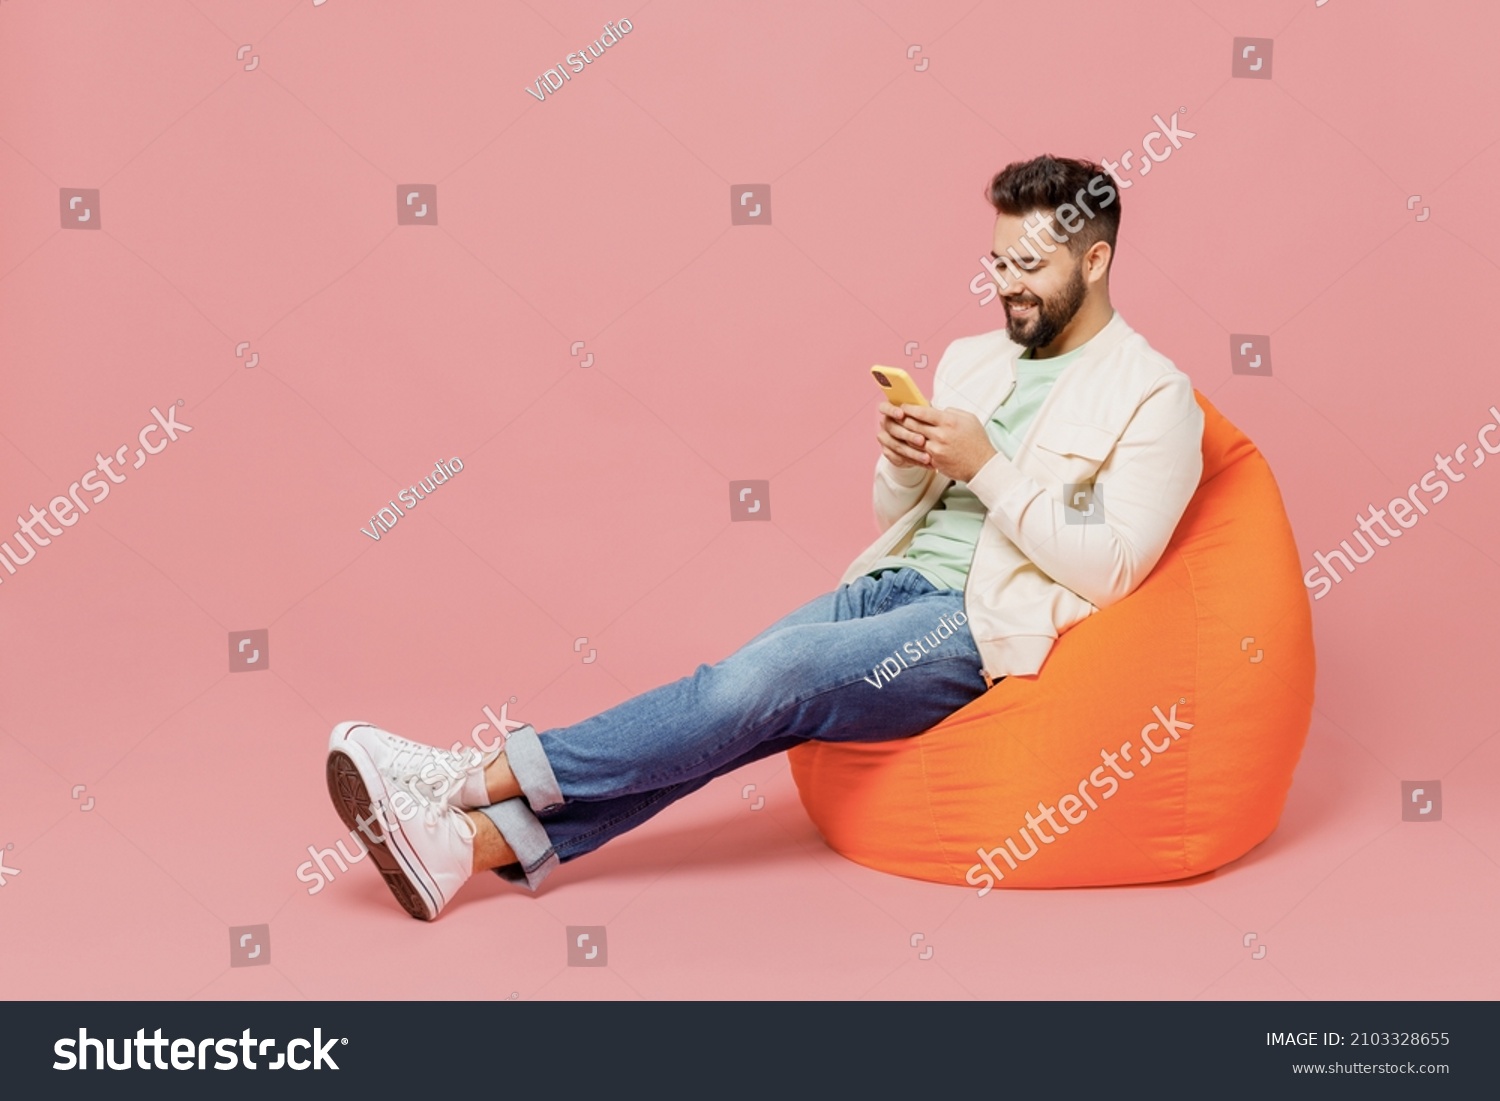 Full body young smiling cheerful happy man 20s in trendy jacket shirt sit in bag chair hold in hand use mobile cell phone isolated on plain pastel light pink background studio People lifestyle concept #2103328655